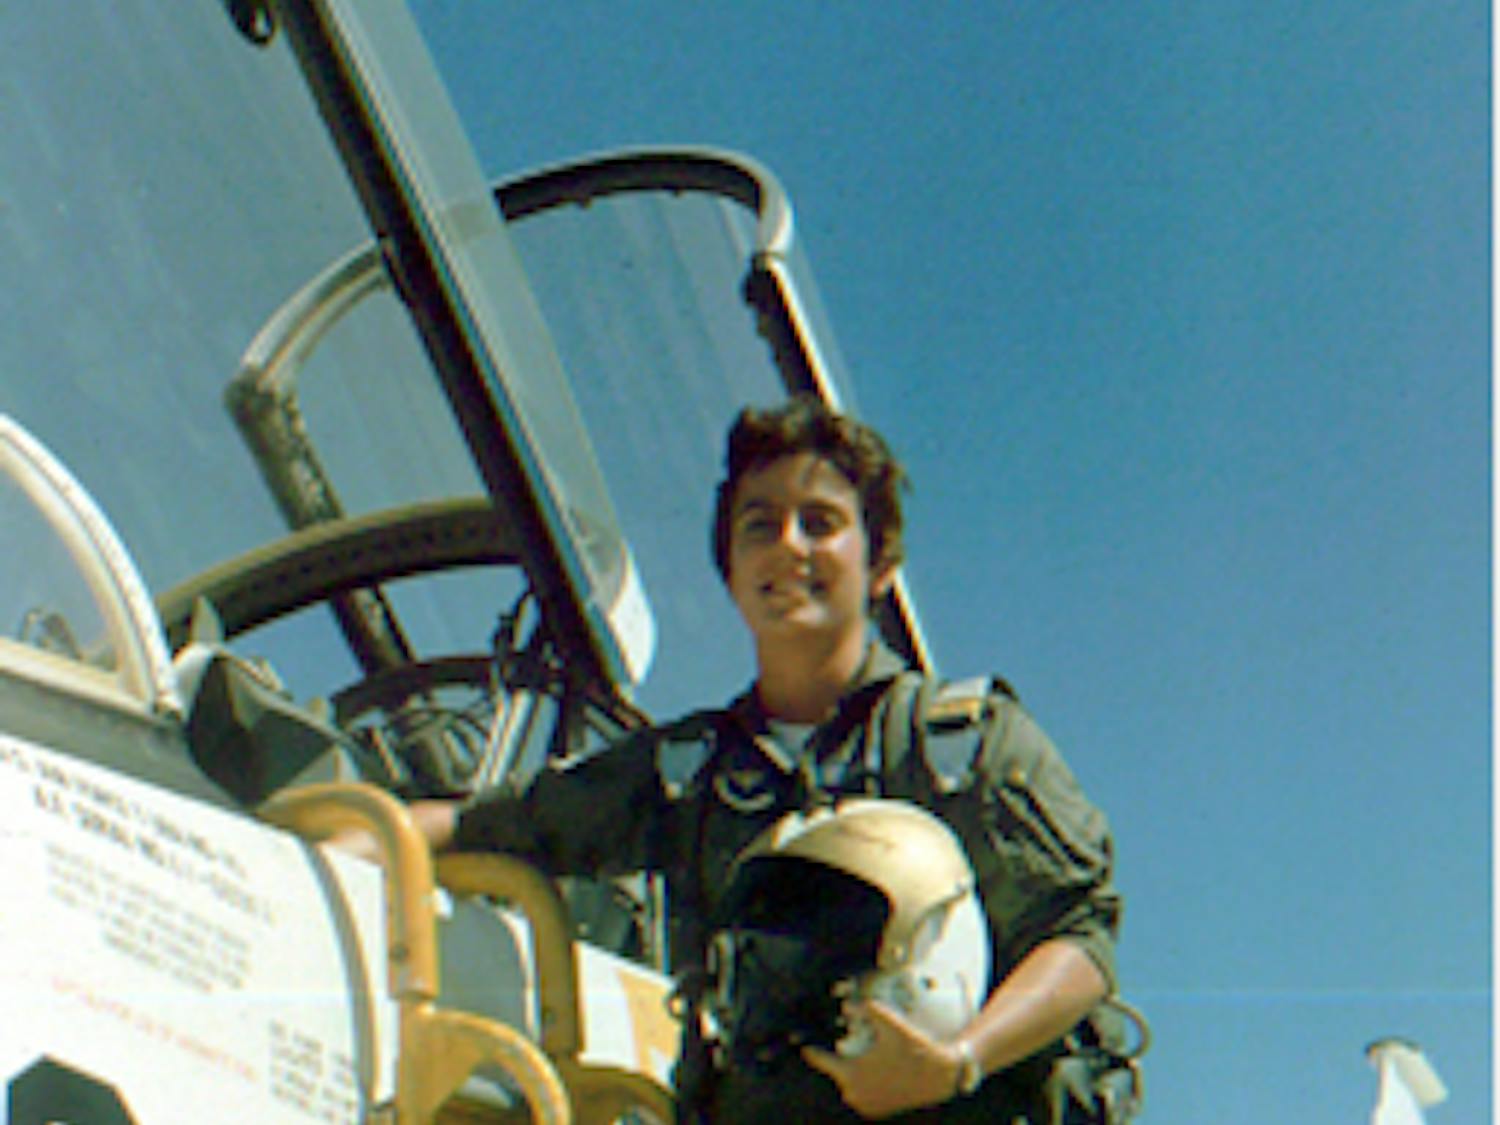 Captain Wendy Rogers on her T-38 supersonic trainer at Williams AFB (1981). Photo courtesy Wendy Rogers.